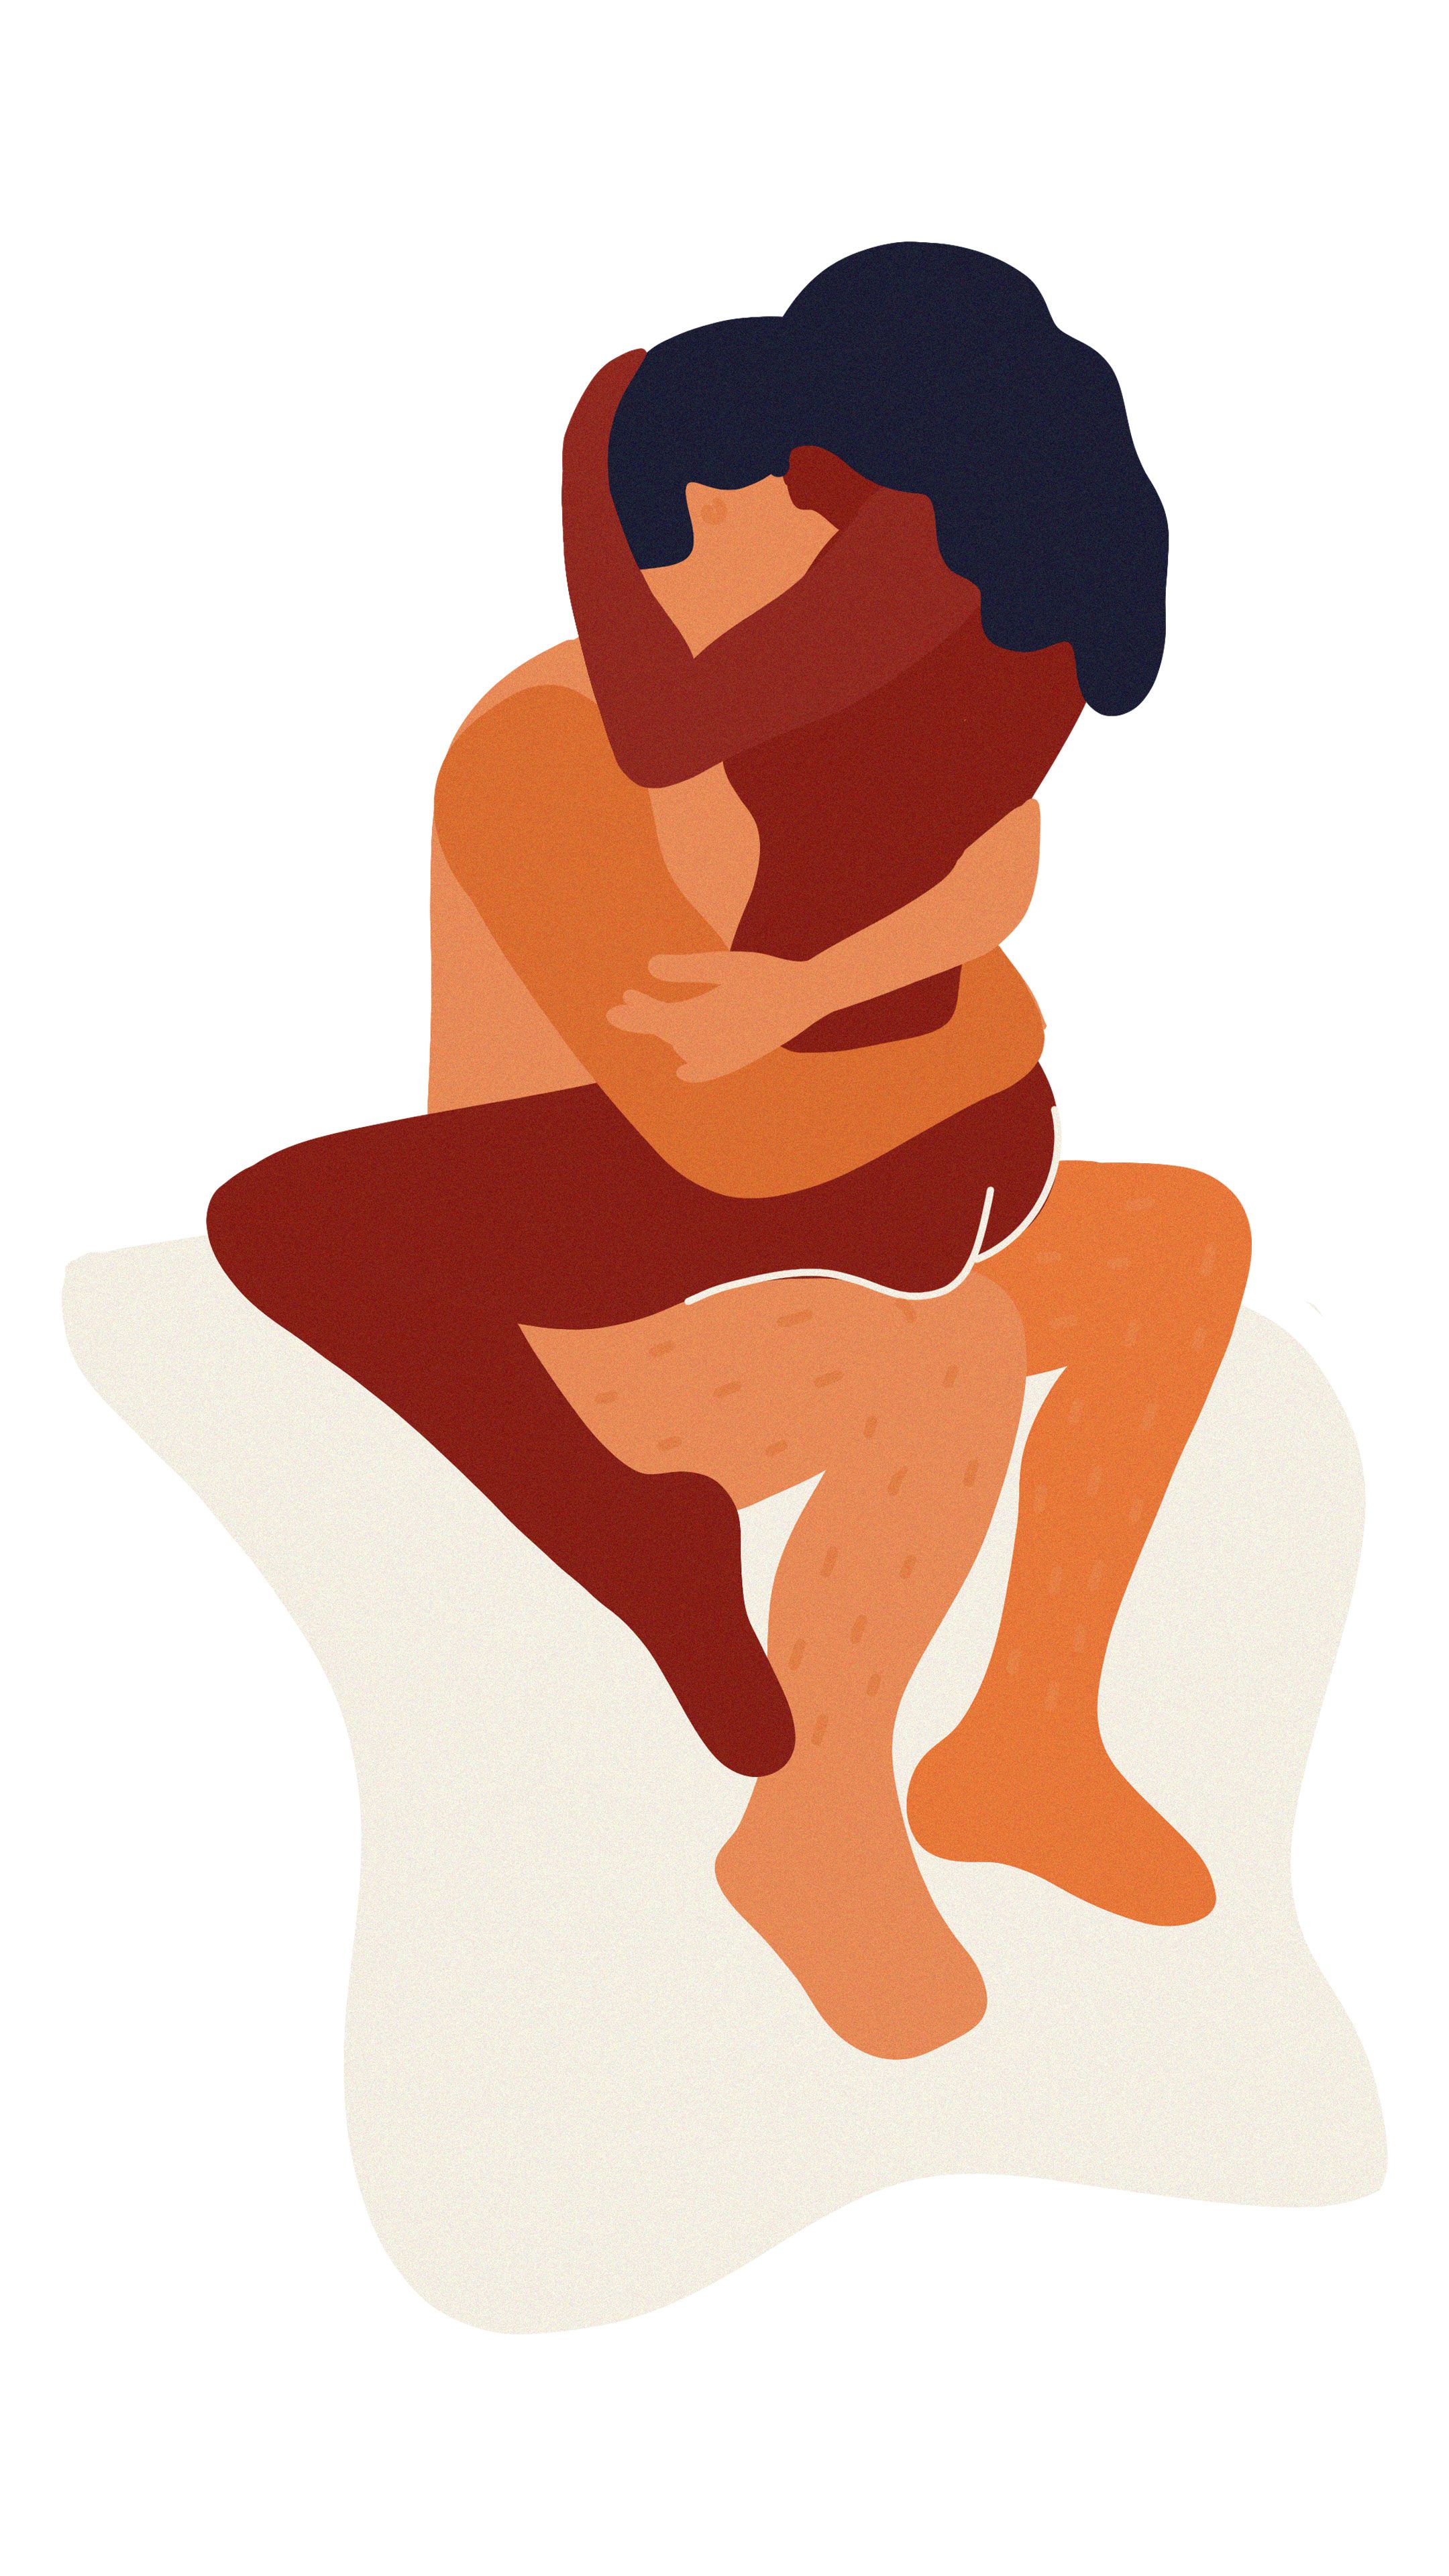 12 Romantic and Intimate Sex Positions, According to an Expert